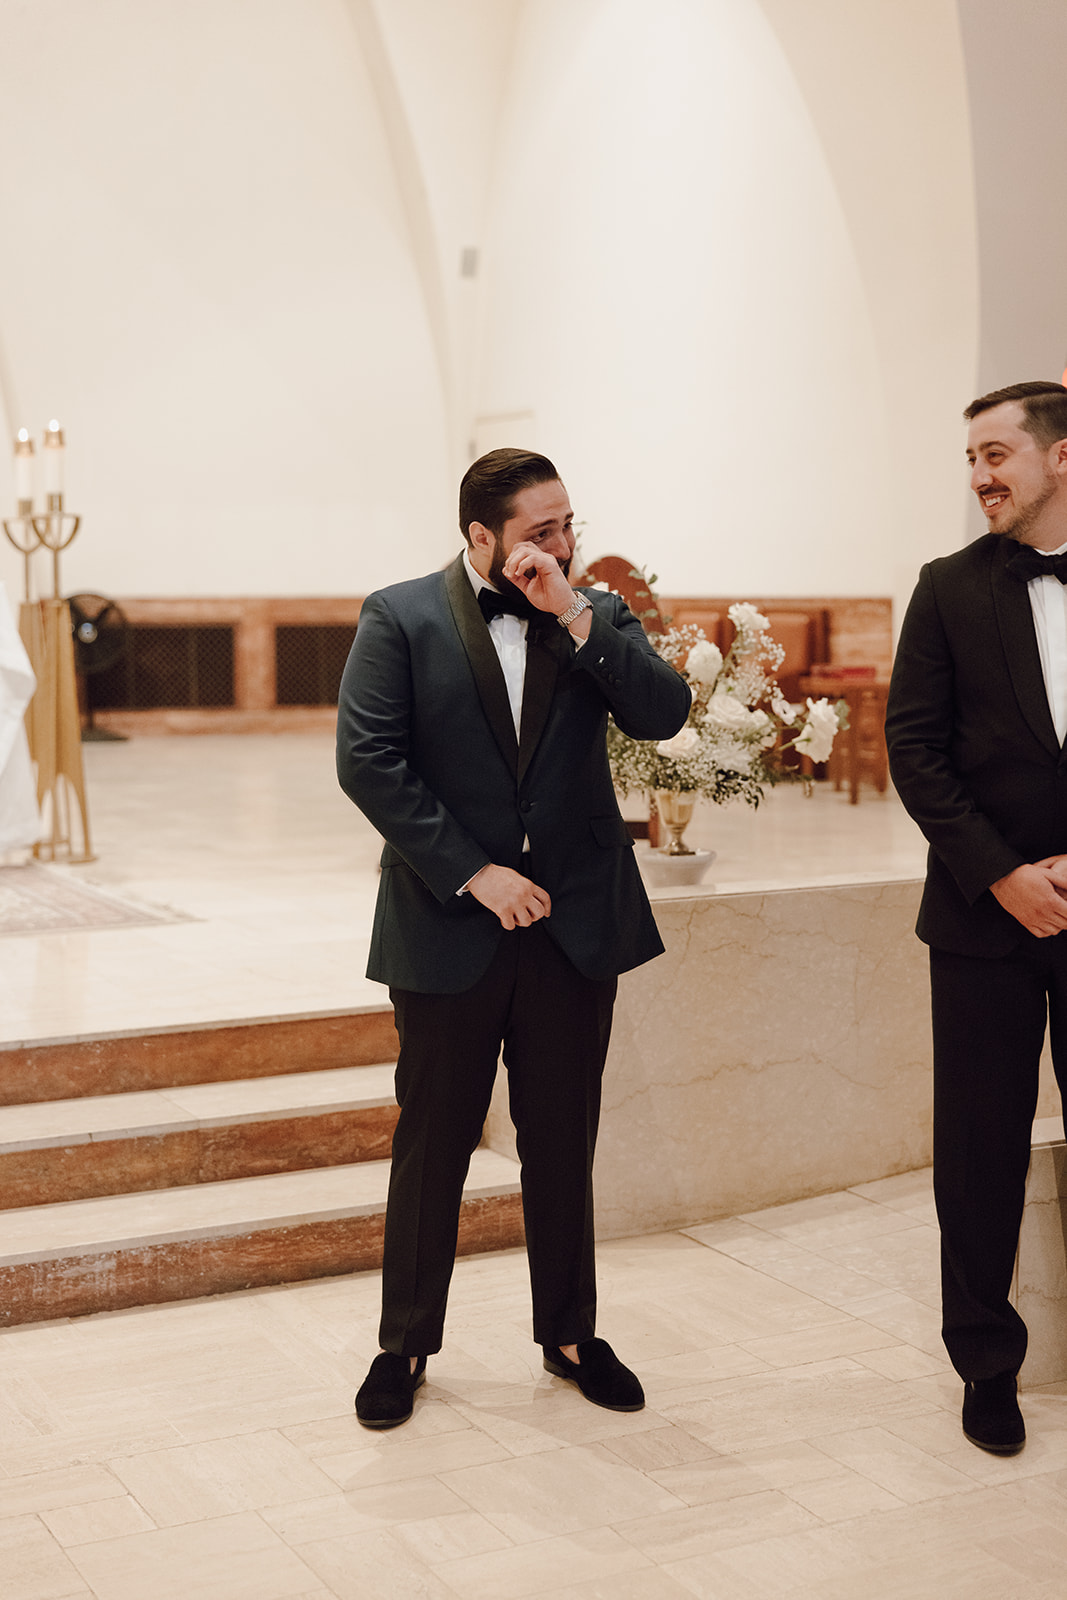 the groom brushing away his tears as the bride walks down the aisle